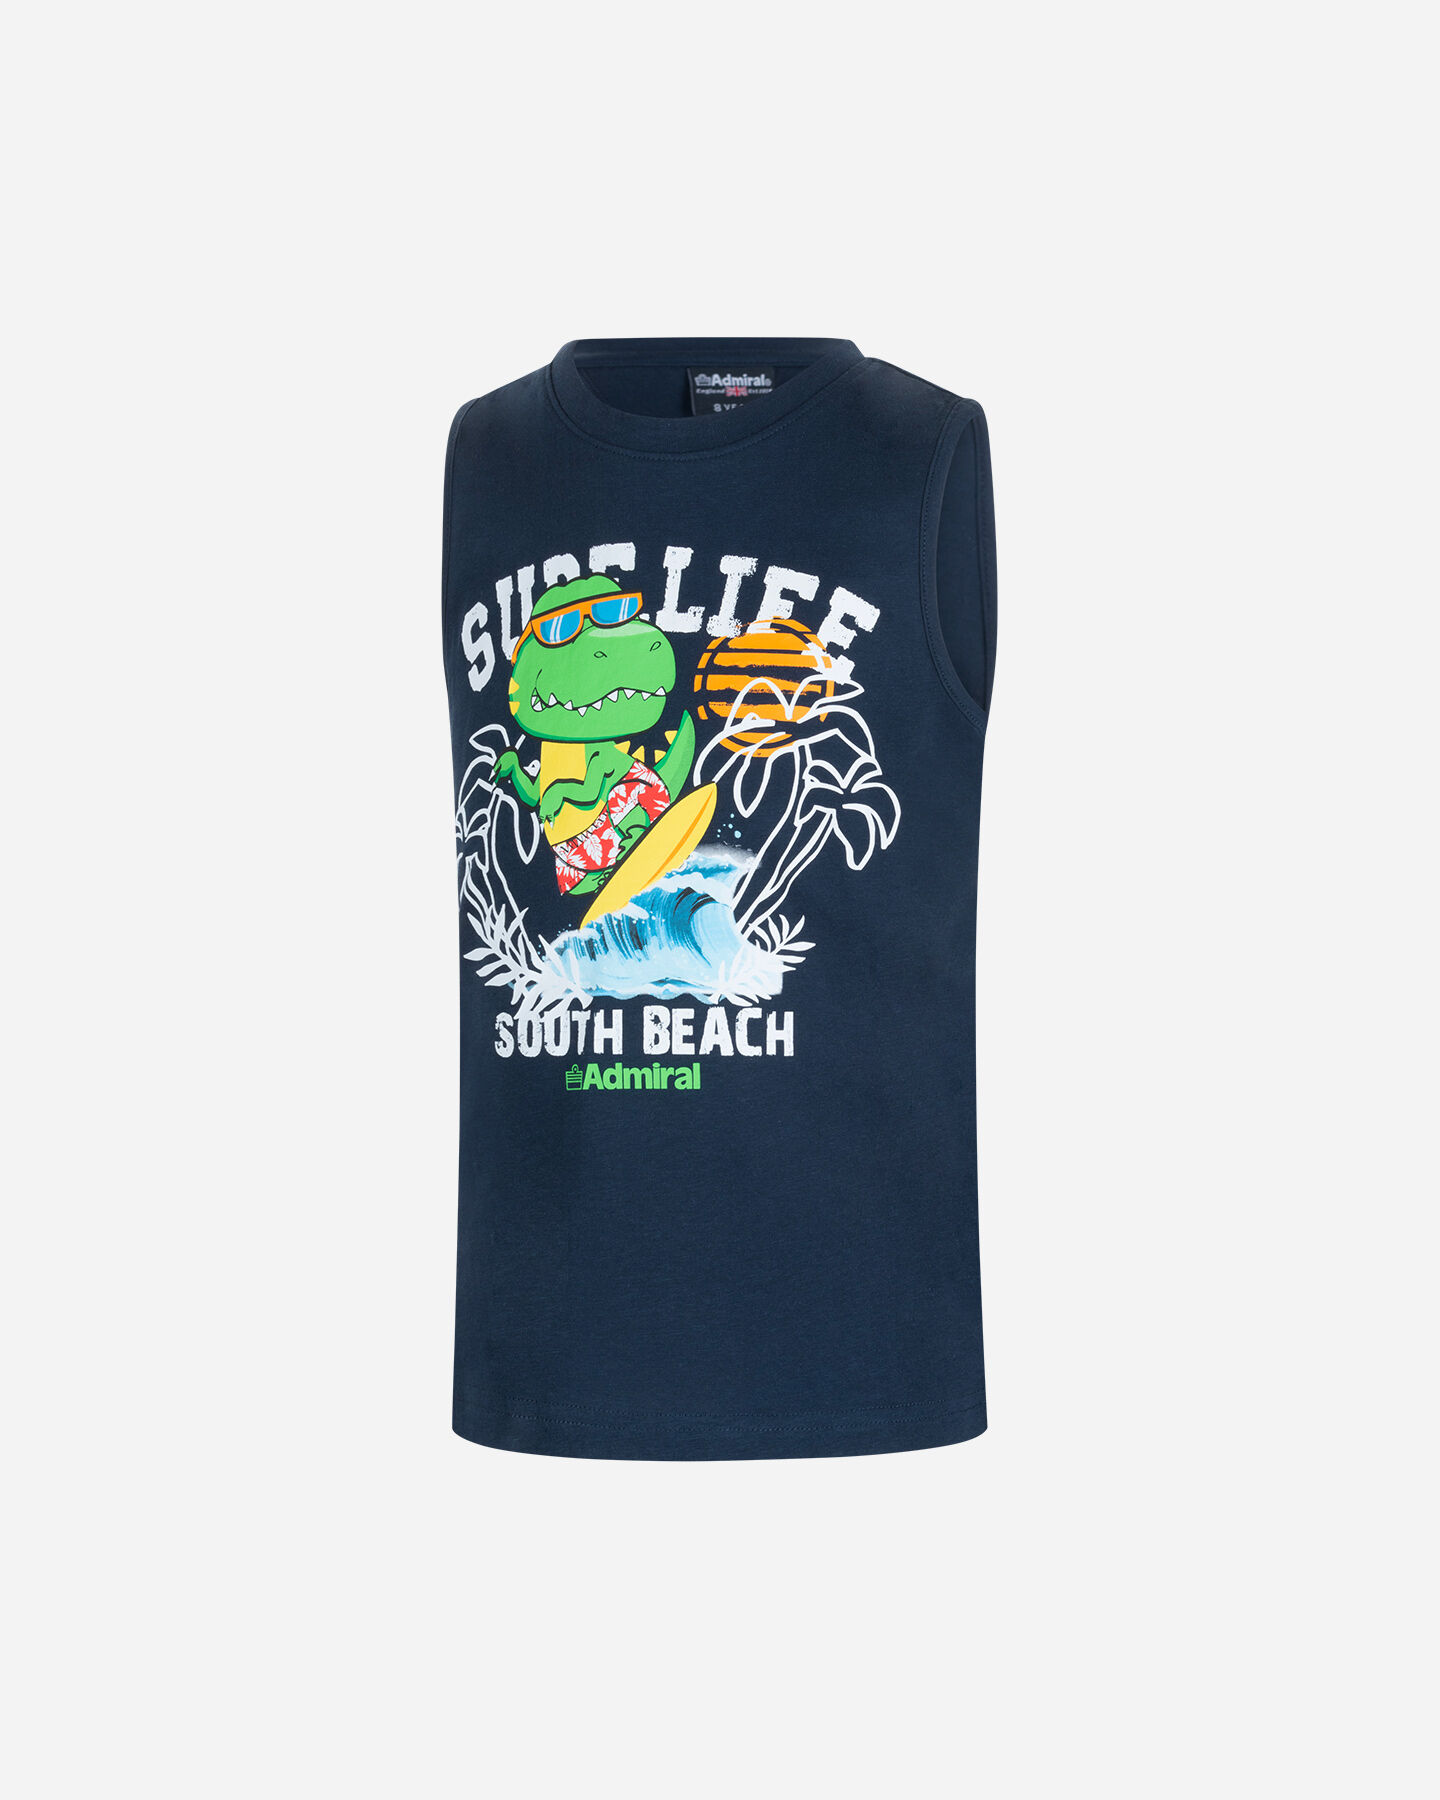  T-Shirt ADMIRAL SURFER DINO JR S4121681|519|4A scatto 0